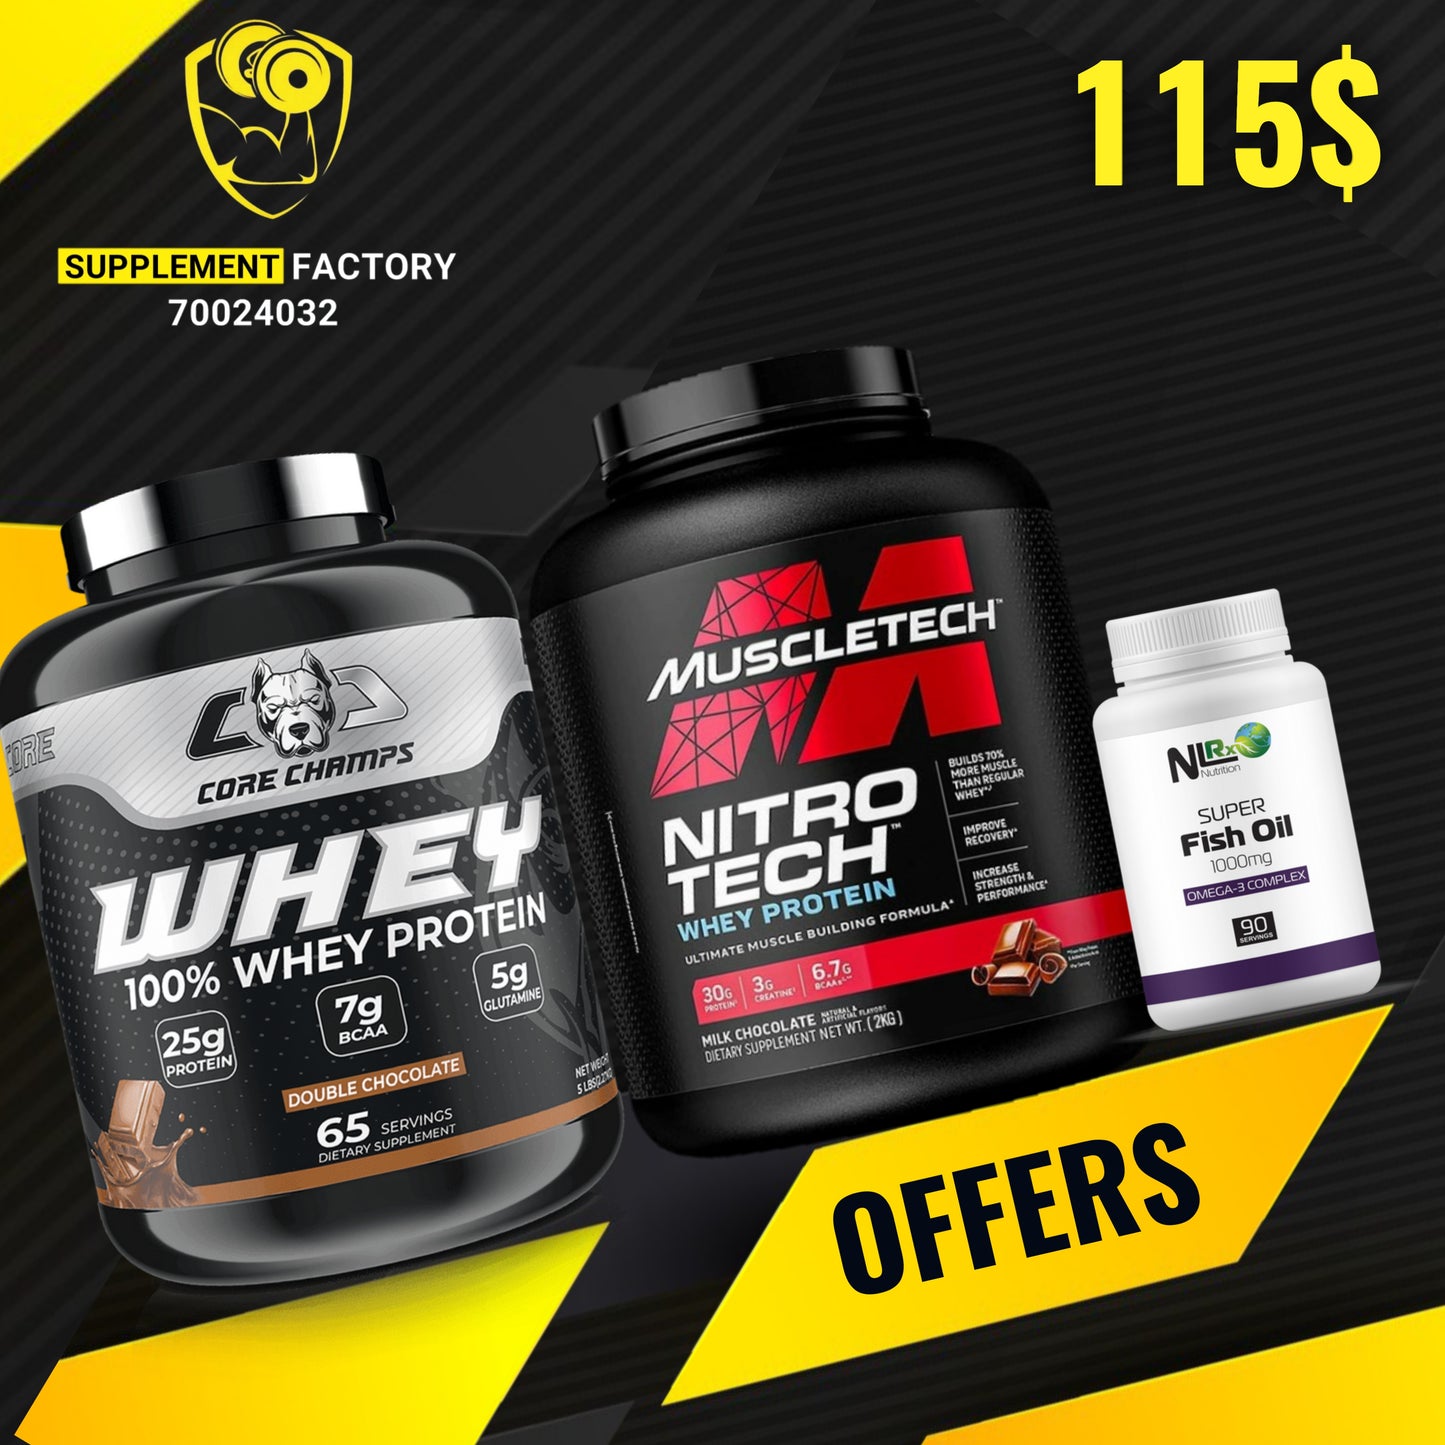 Core Champs whey + Nitrotech Whey + Fishoil